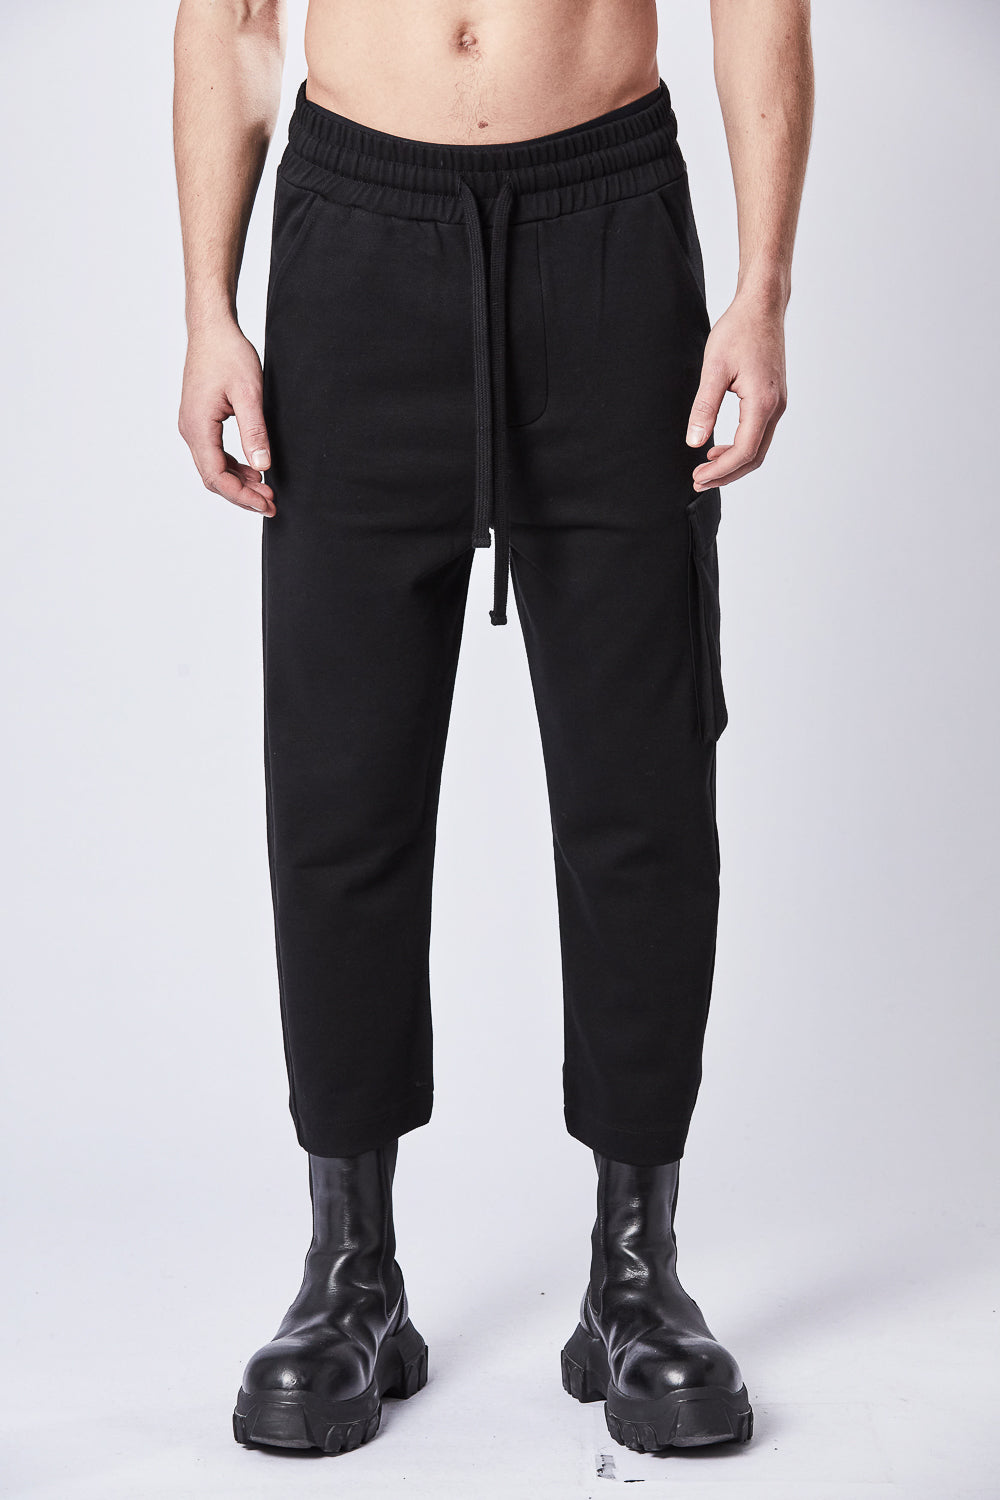 Buy the Thom Krom M ST 397 Sweatpants in Black at Intro. Spend £50 for free UK delivery. Official stockists. We ship worldwide.